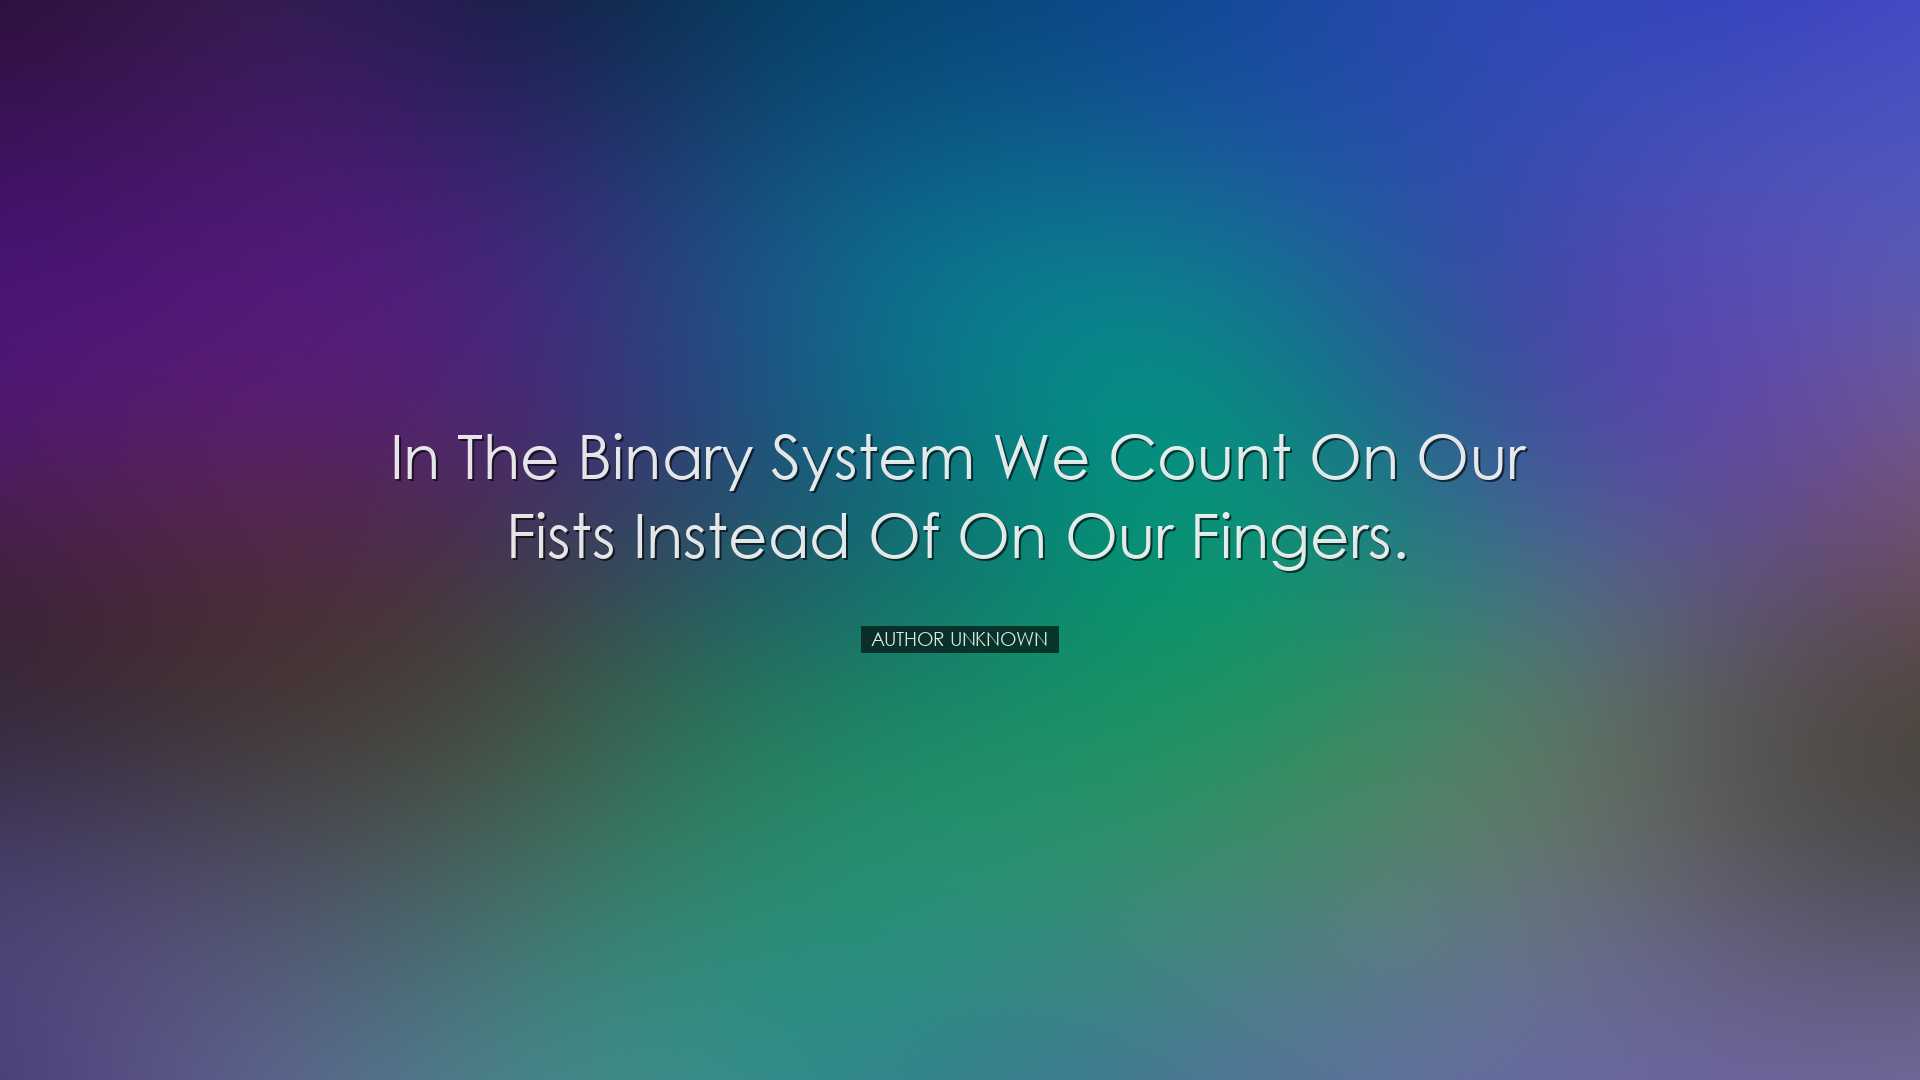 In the binary system we count on our fists instead of on our finge